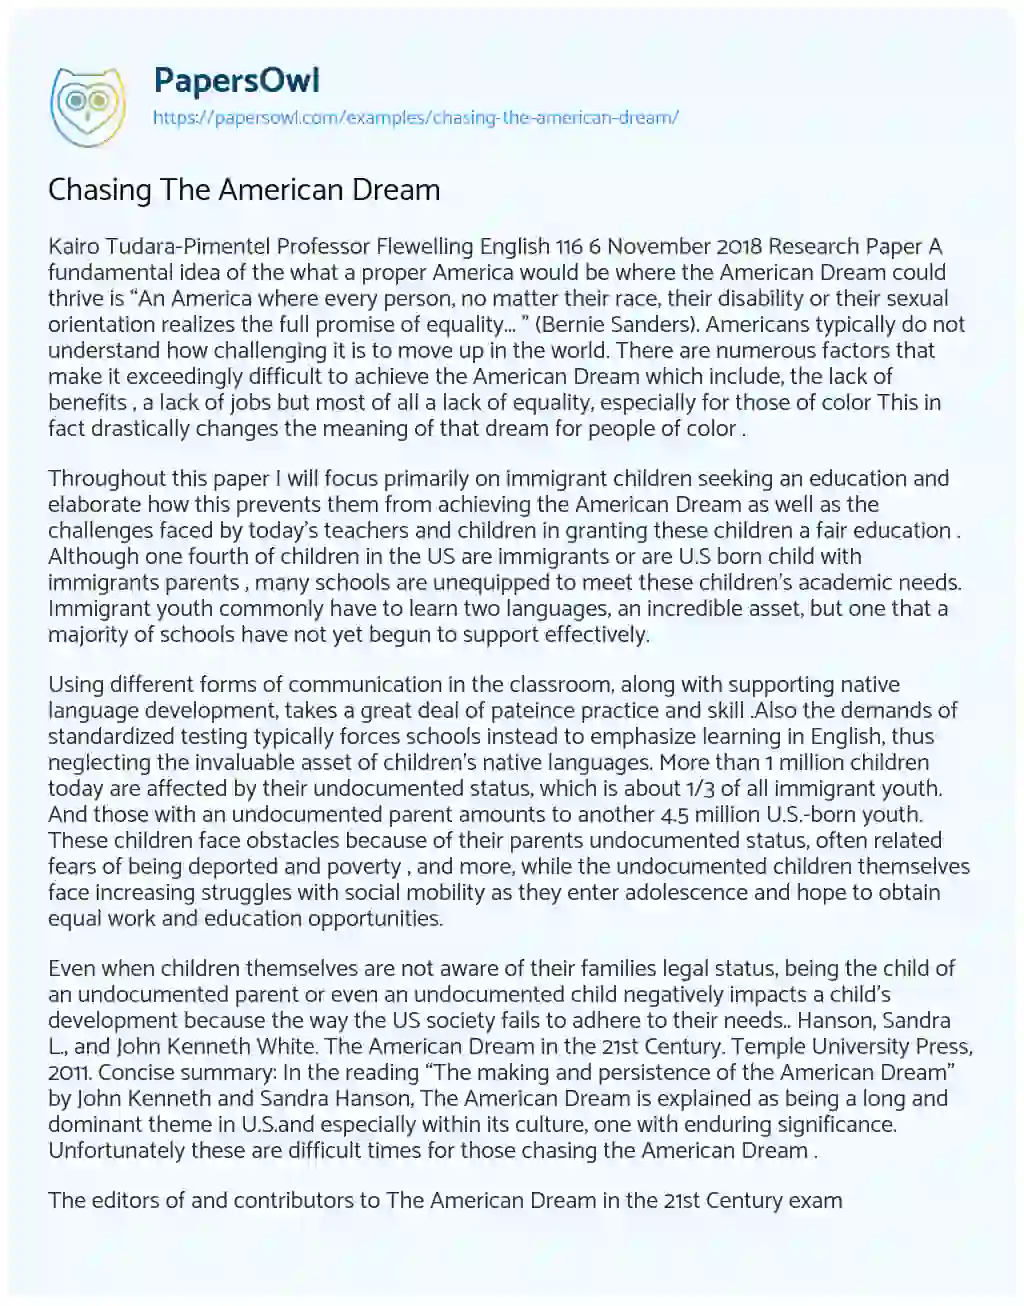 Essay on Chasing the American Dream